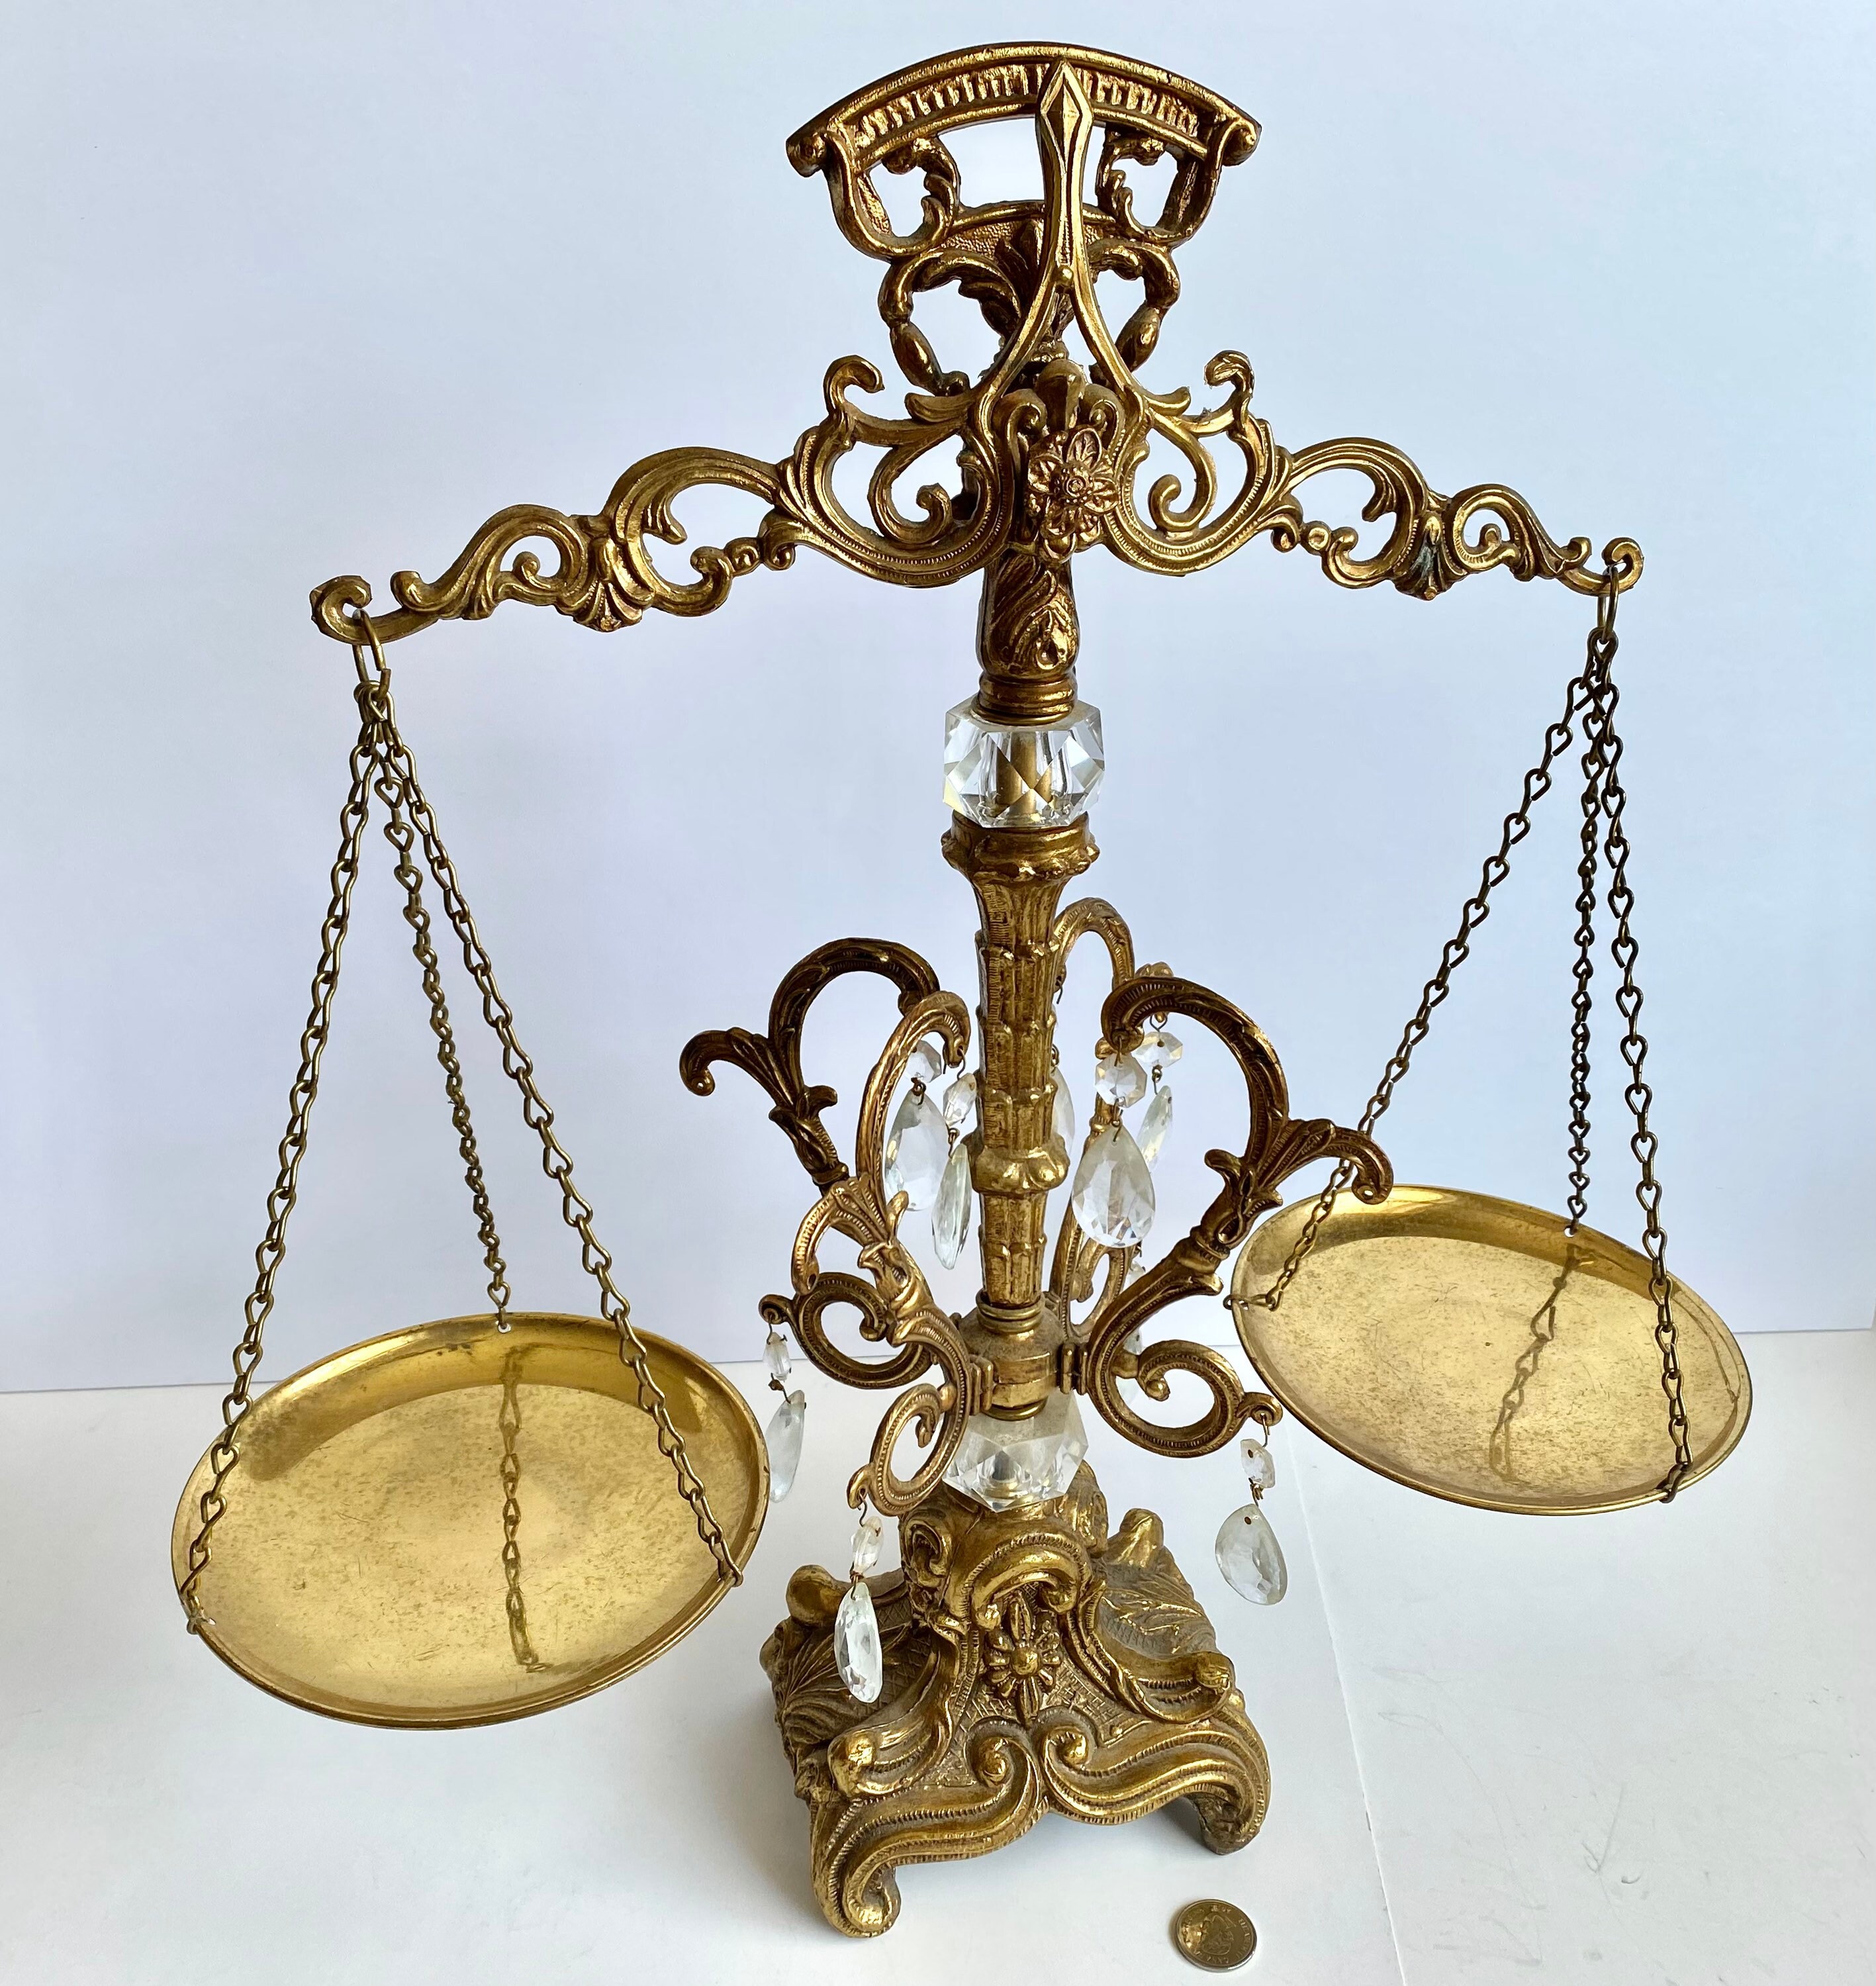 Vintage Style Metal Balance Scale, Decorative Antique Weight Balancing Scale, Lawyer Scale of Justice, Jewelry Tower Tray, Farmhouse Candleholder